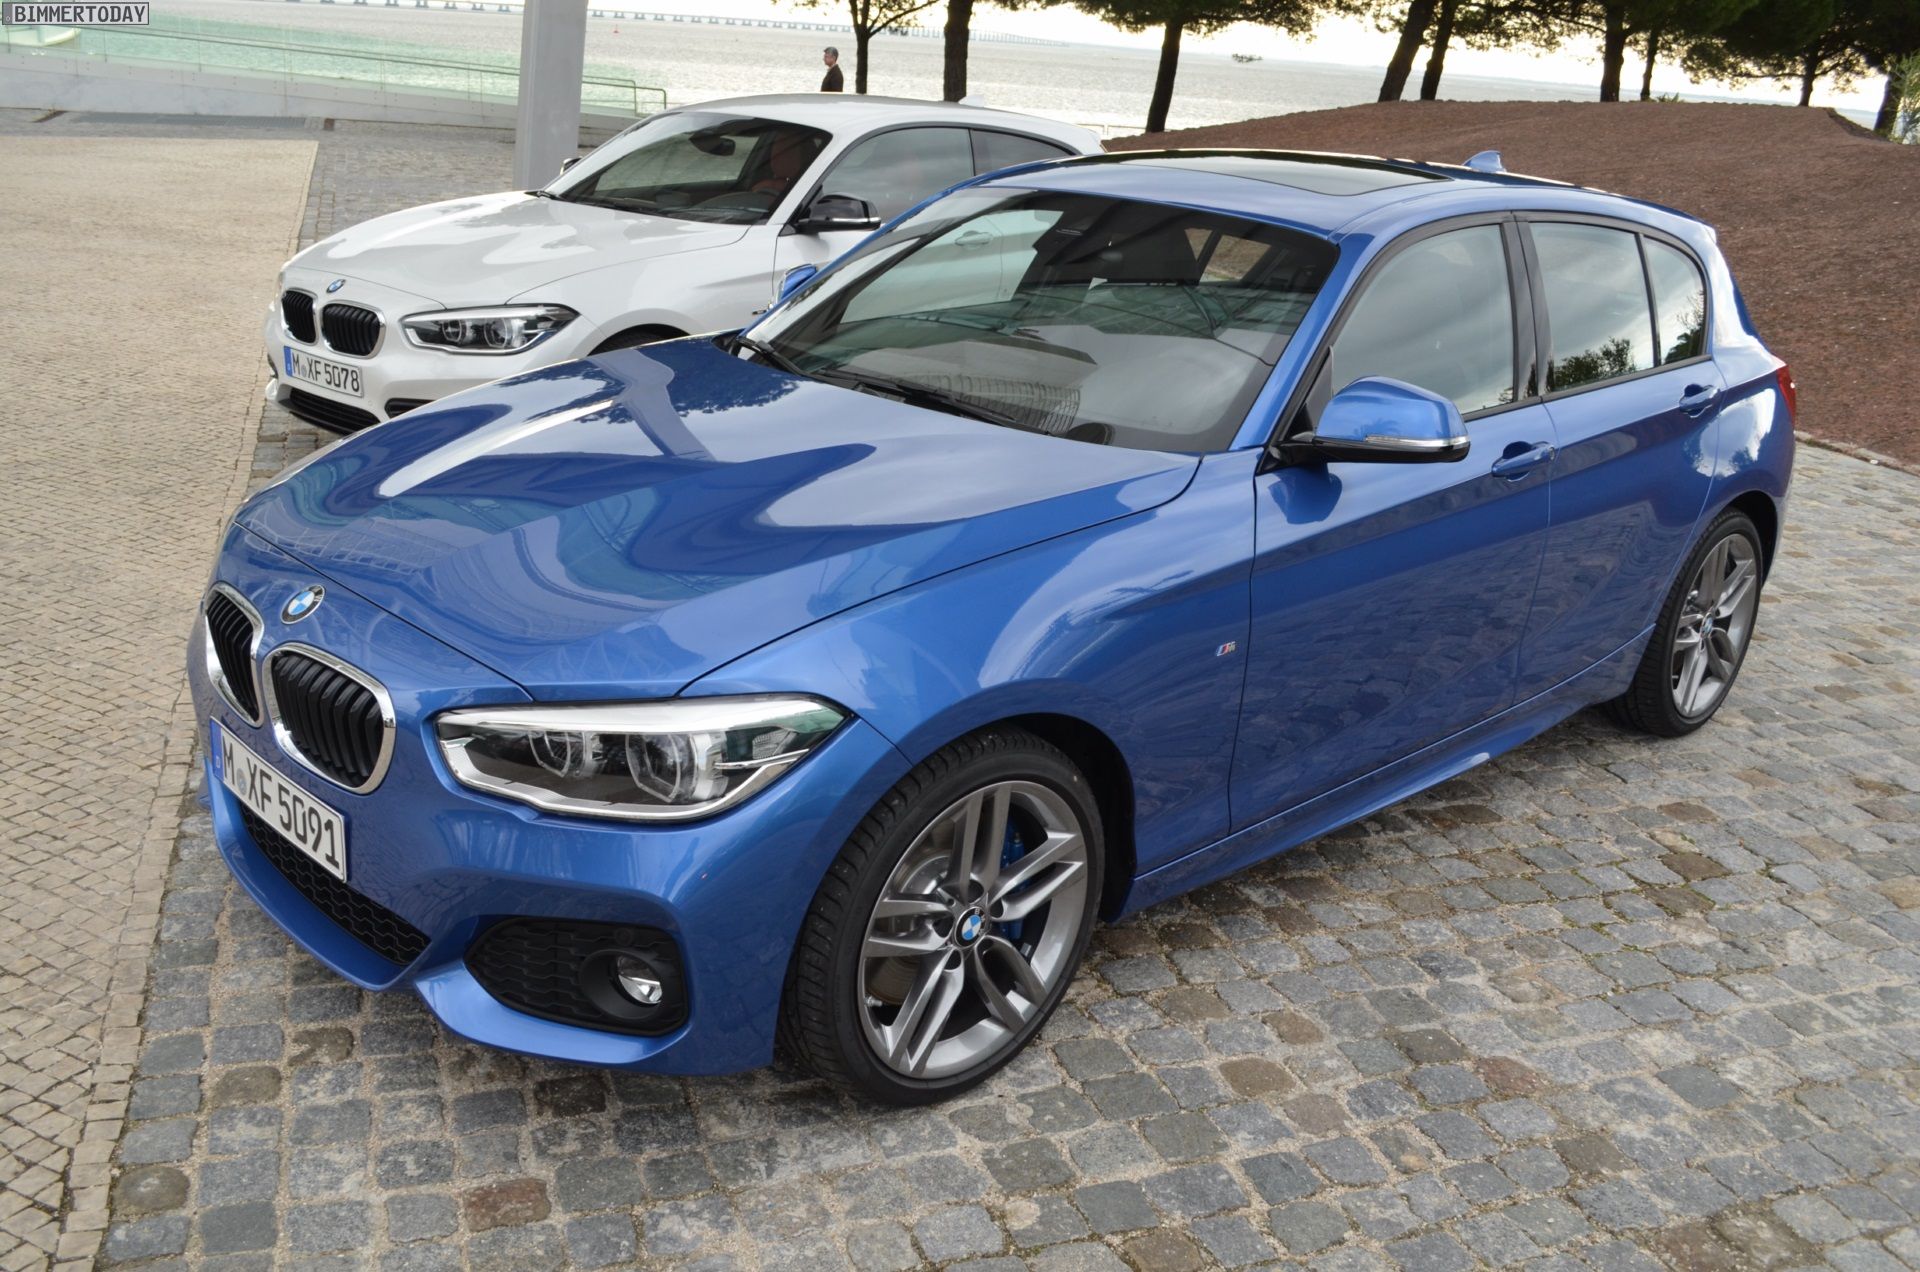 BMW Plans to Continue RWD Platform for the 2018 1-Series